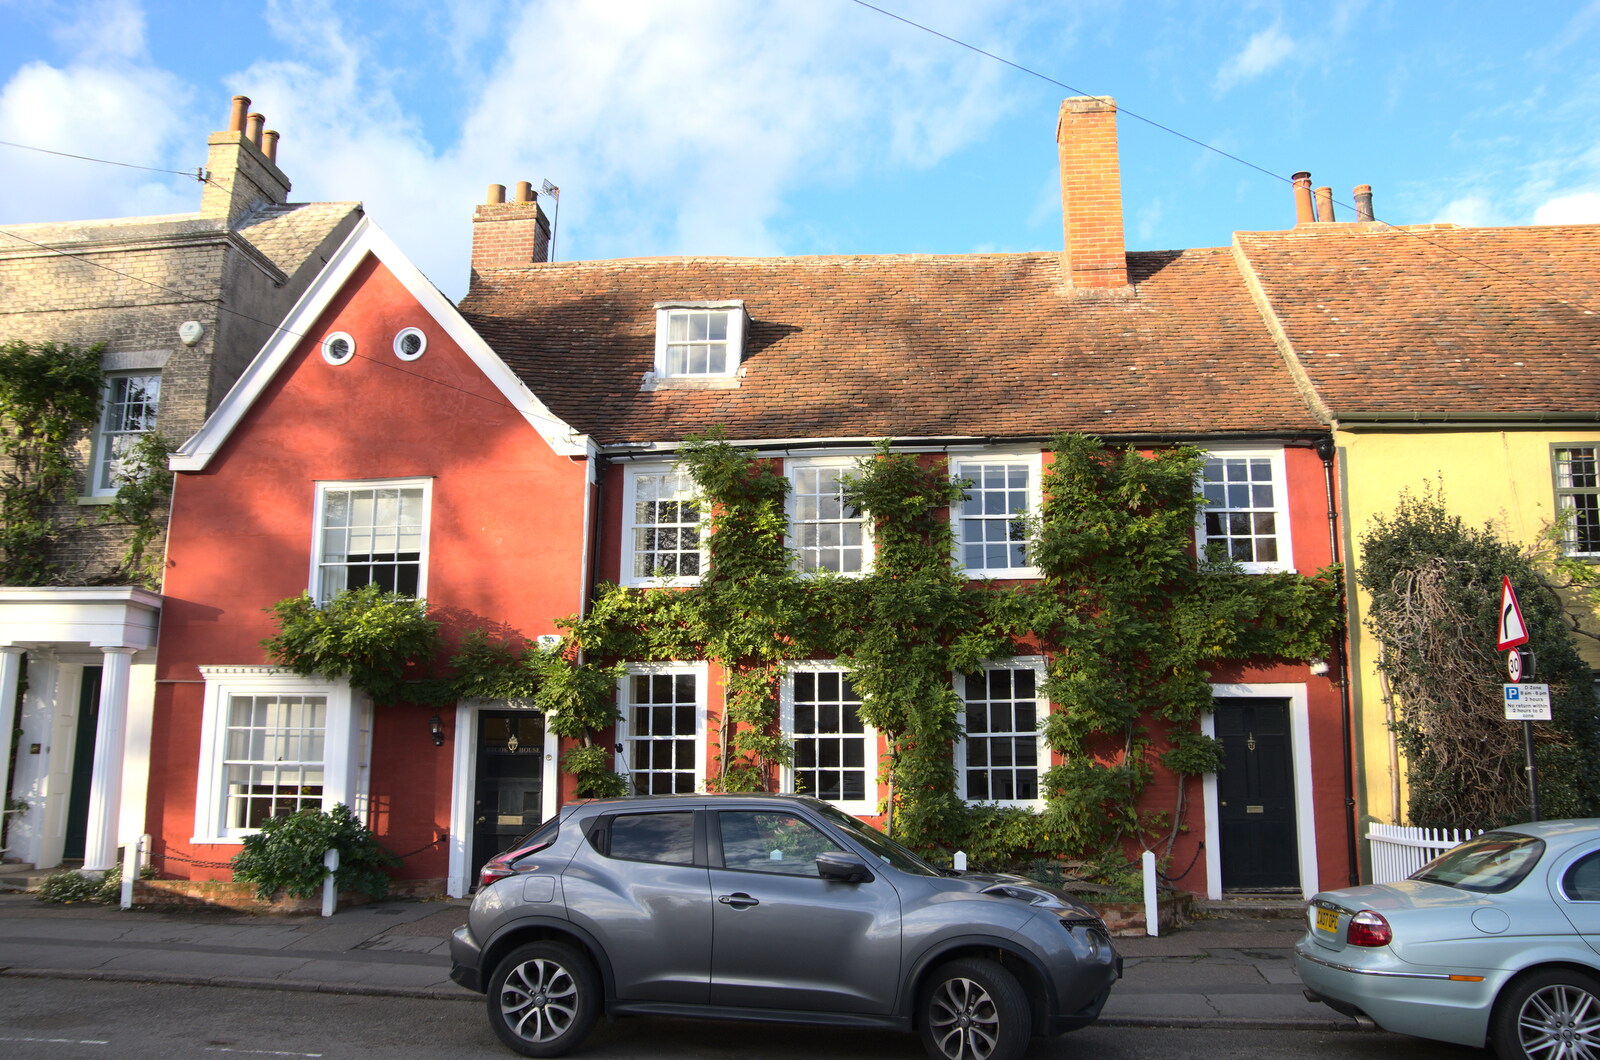 A Postcard from Flatford and Dedham, Suffolk and Essex, 9th November 2022: Another nice building on the main road